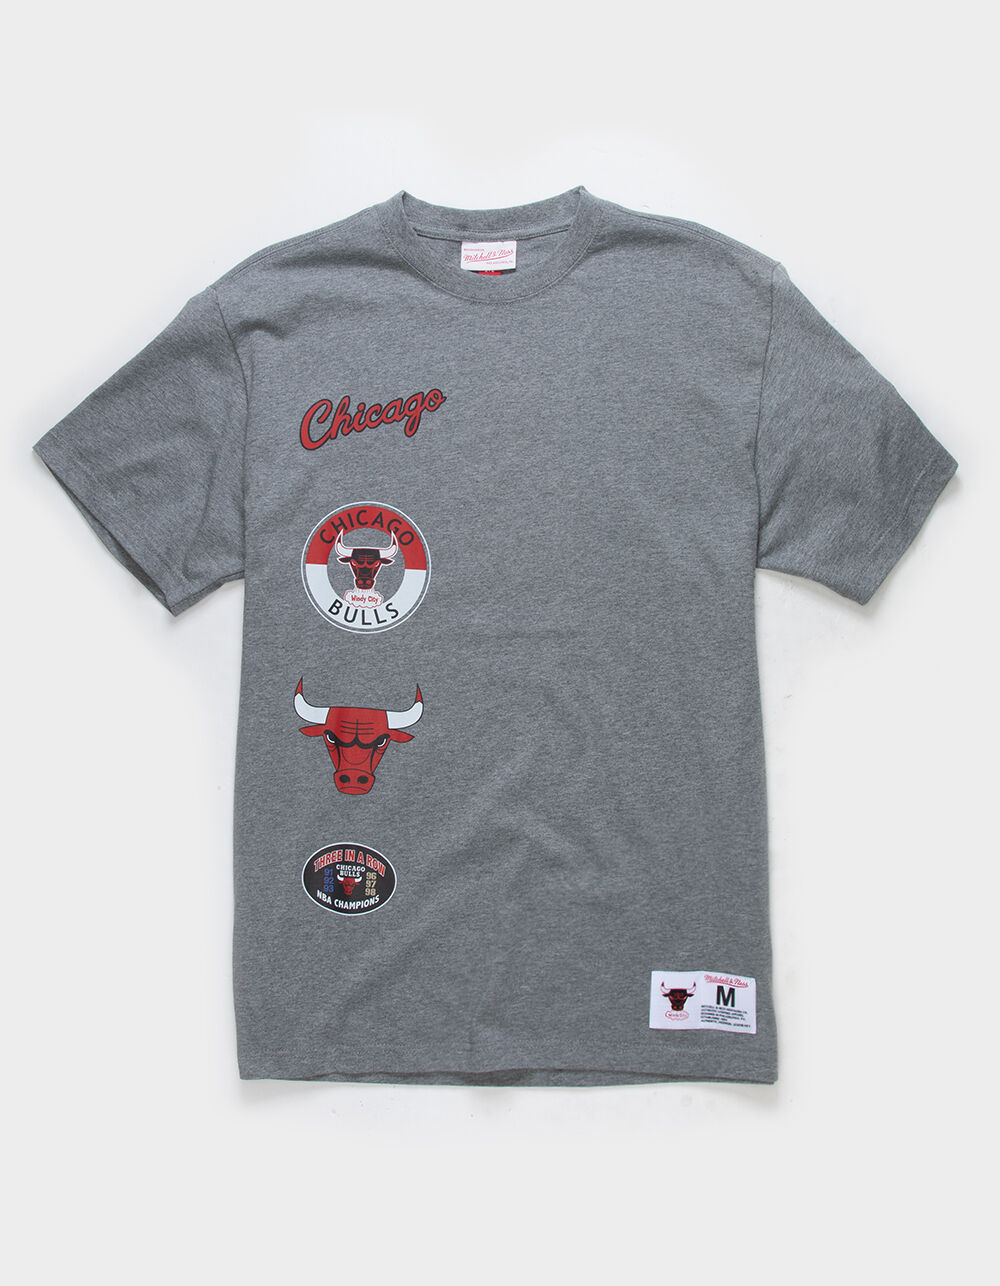 All Star Chicago Bulls Short Sleeve Tee - Black  Tee shirt print, Mens  outfits, Mens casual outfits